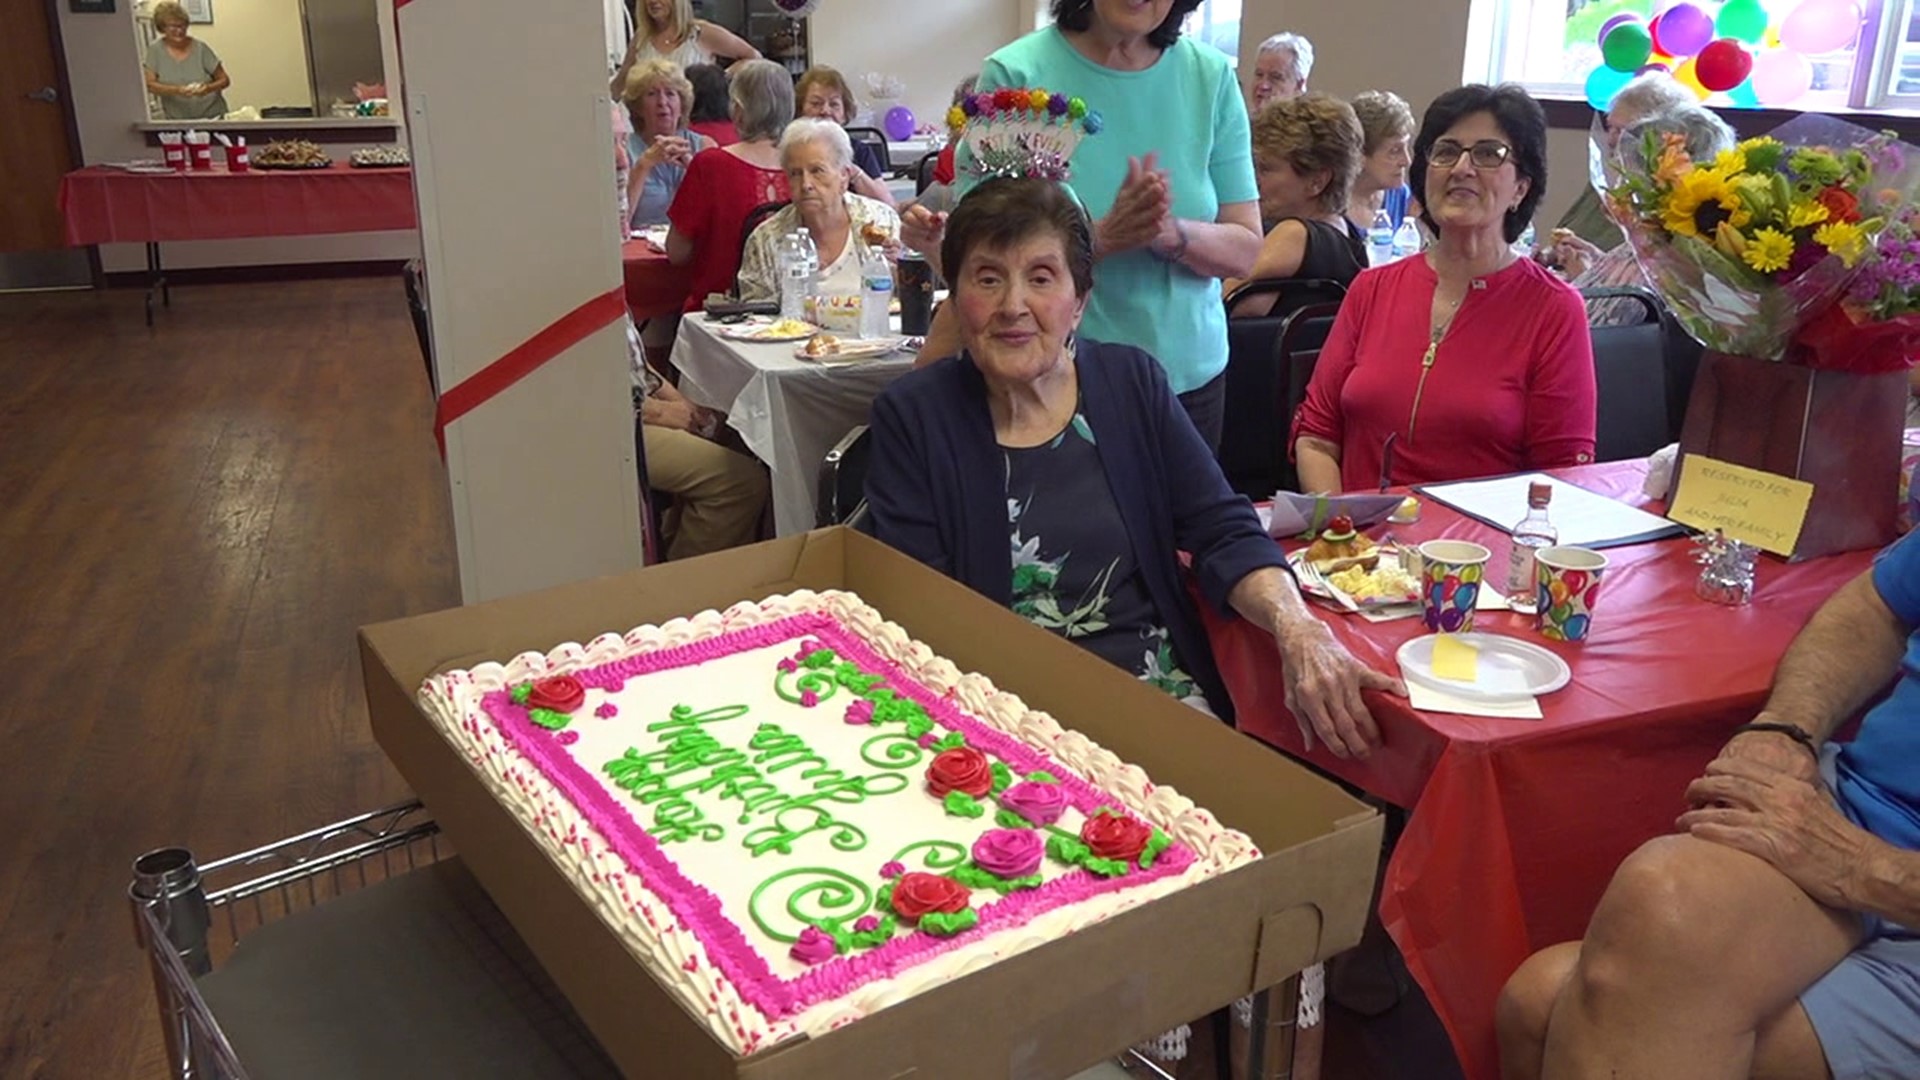 It was an early birthday celebration for Julia Mellody in Lackawanna County as she turns 102 Tuesday.